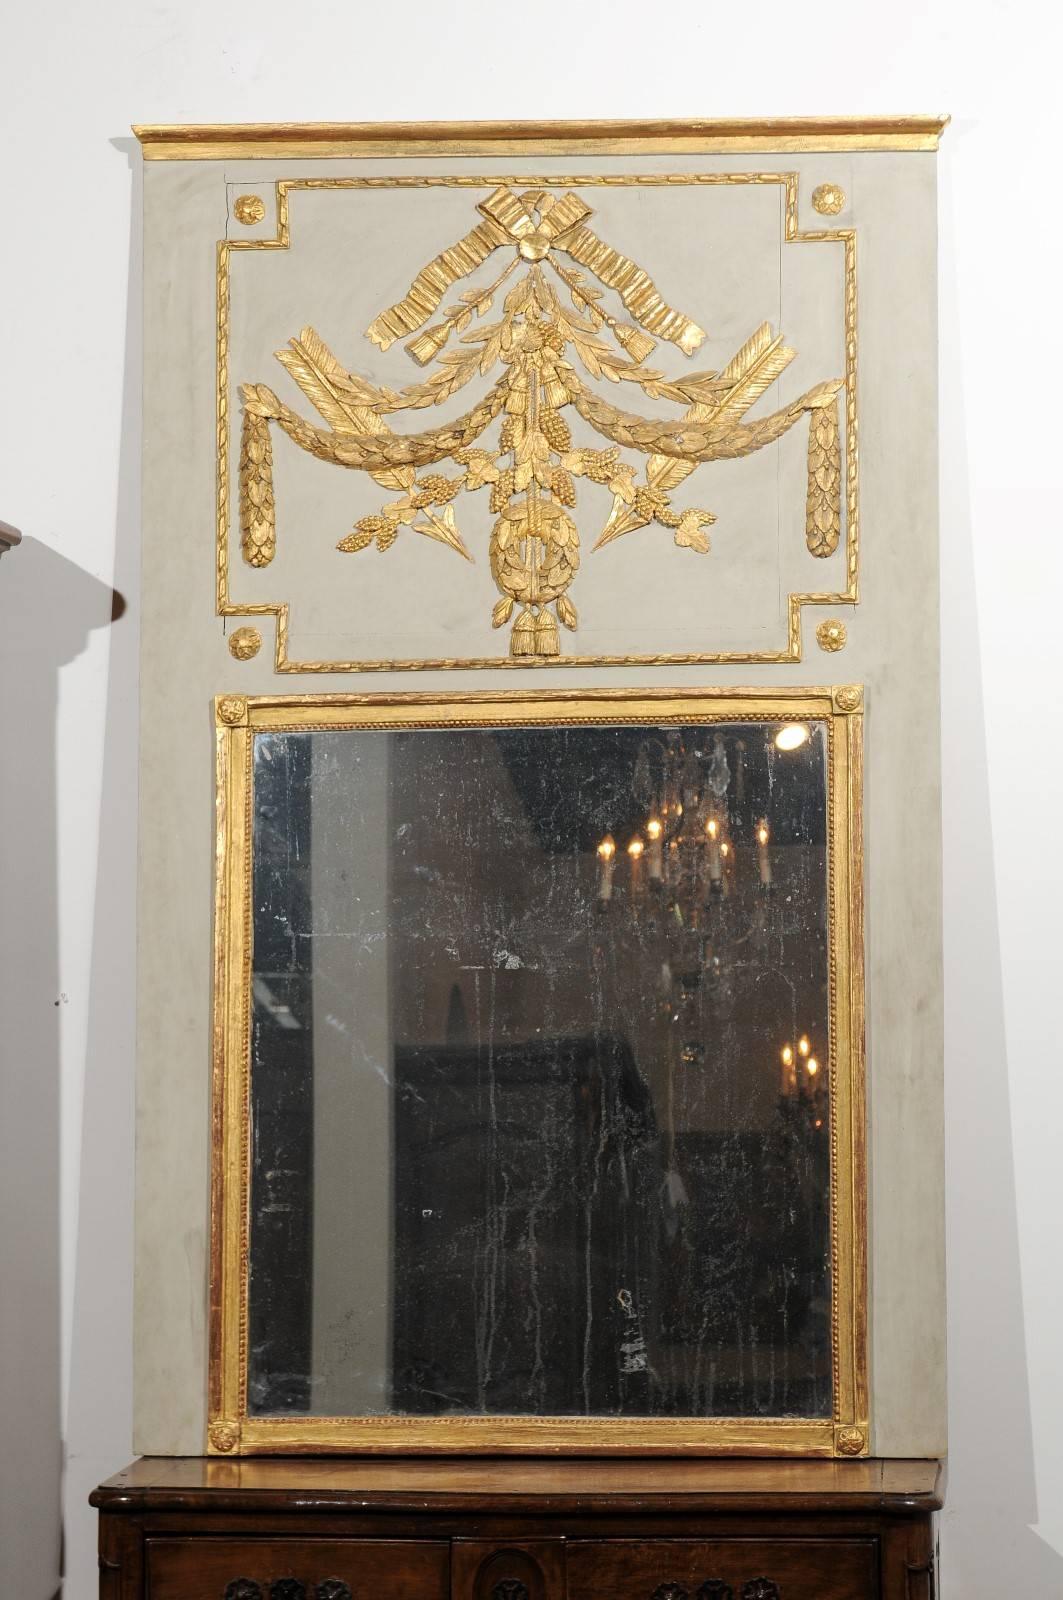 A French 18th century Louis XVI period painted and gilded trumeau mirror with carved motifs. This French trumeau features a linear light grey green painted frame, beautifully accented with a profusion of gilded motifs. In a manner typical of